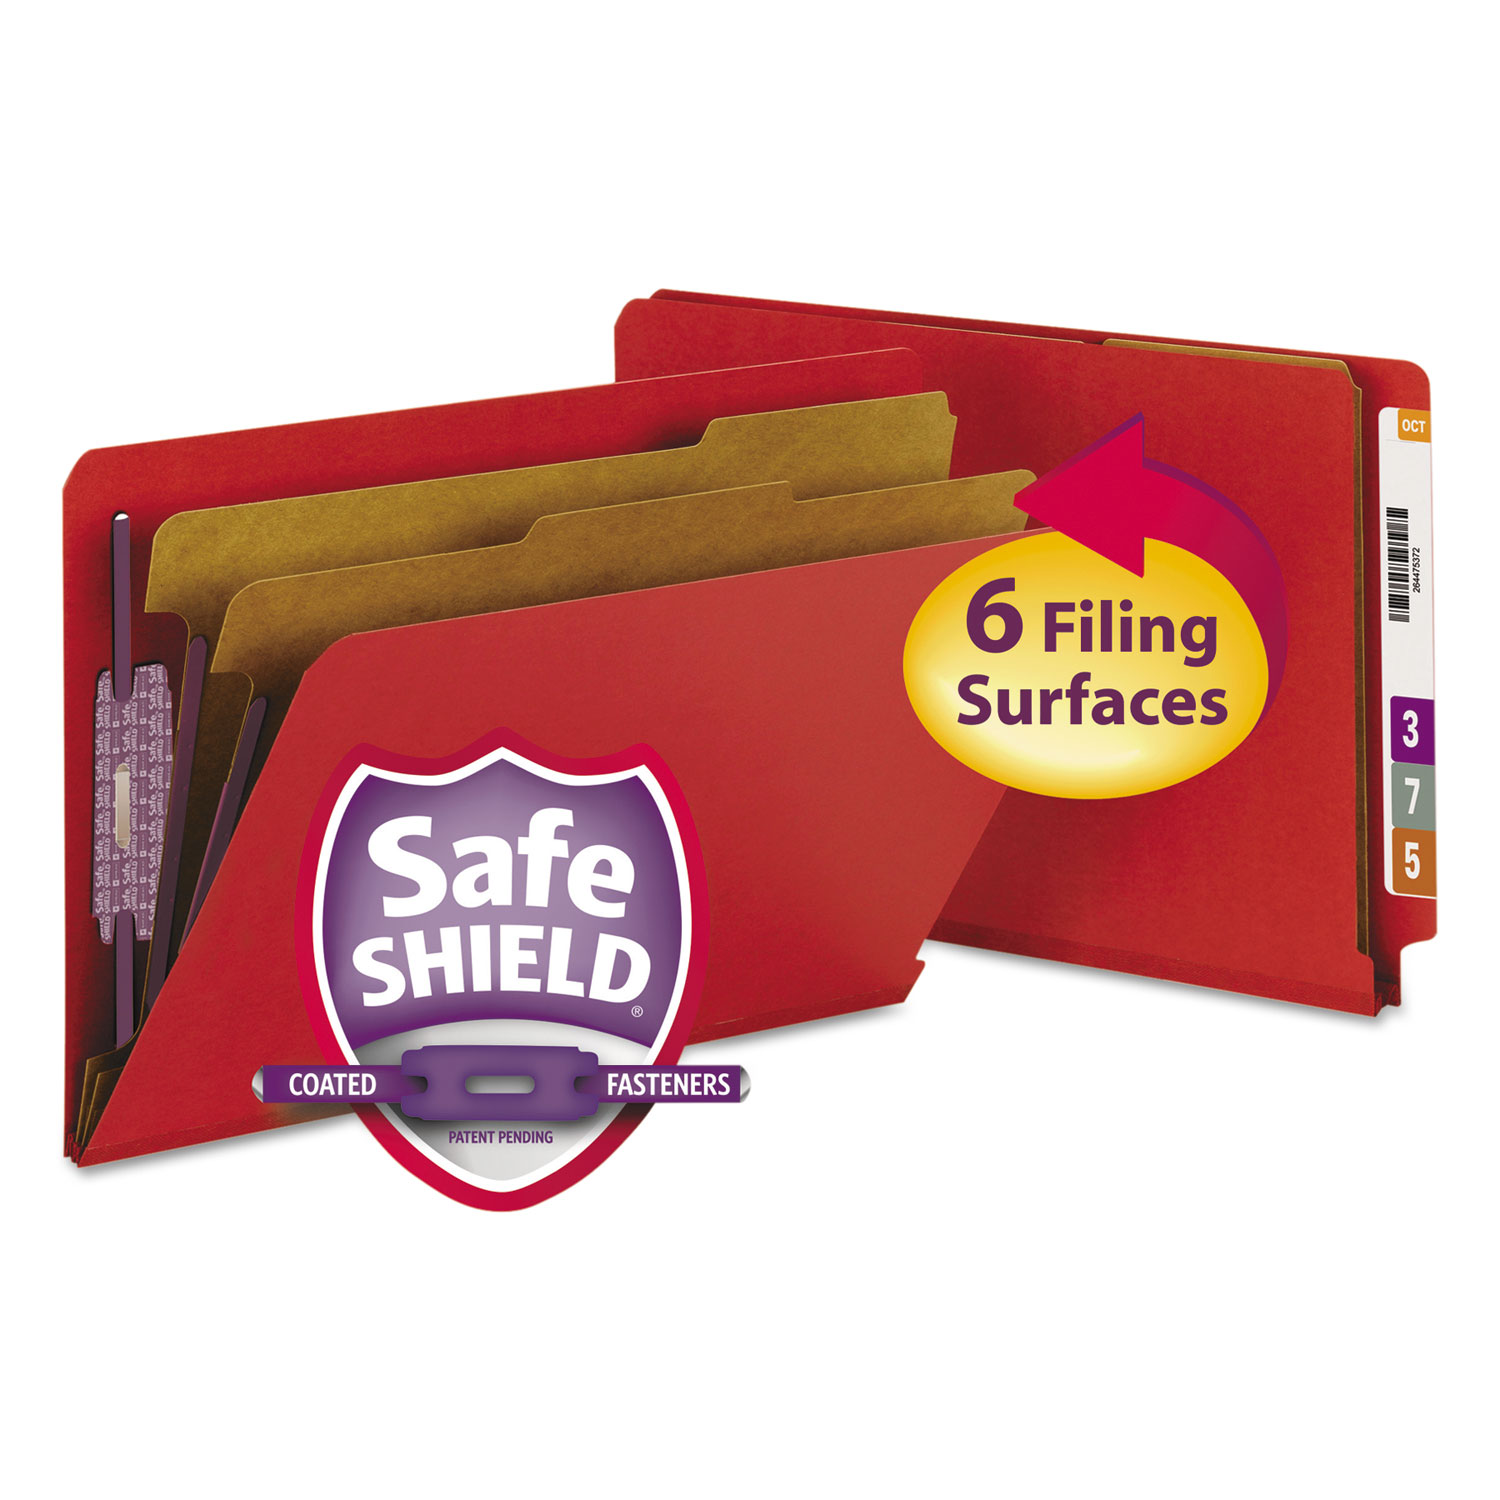  Smead 29783 End Tab Pressboard Classification Folders with SafeSHIELD Fasteners, 2 Dividers, Legal Size, Bright Red, 10/Box (SMD29783) 